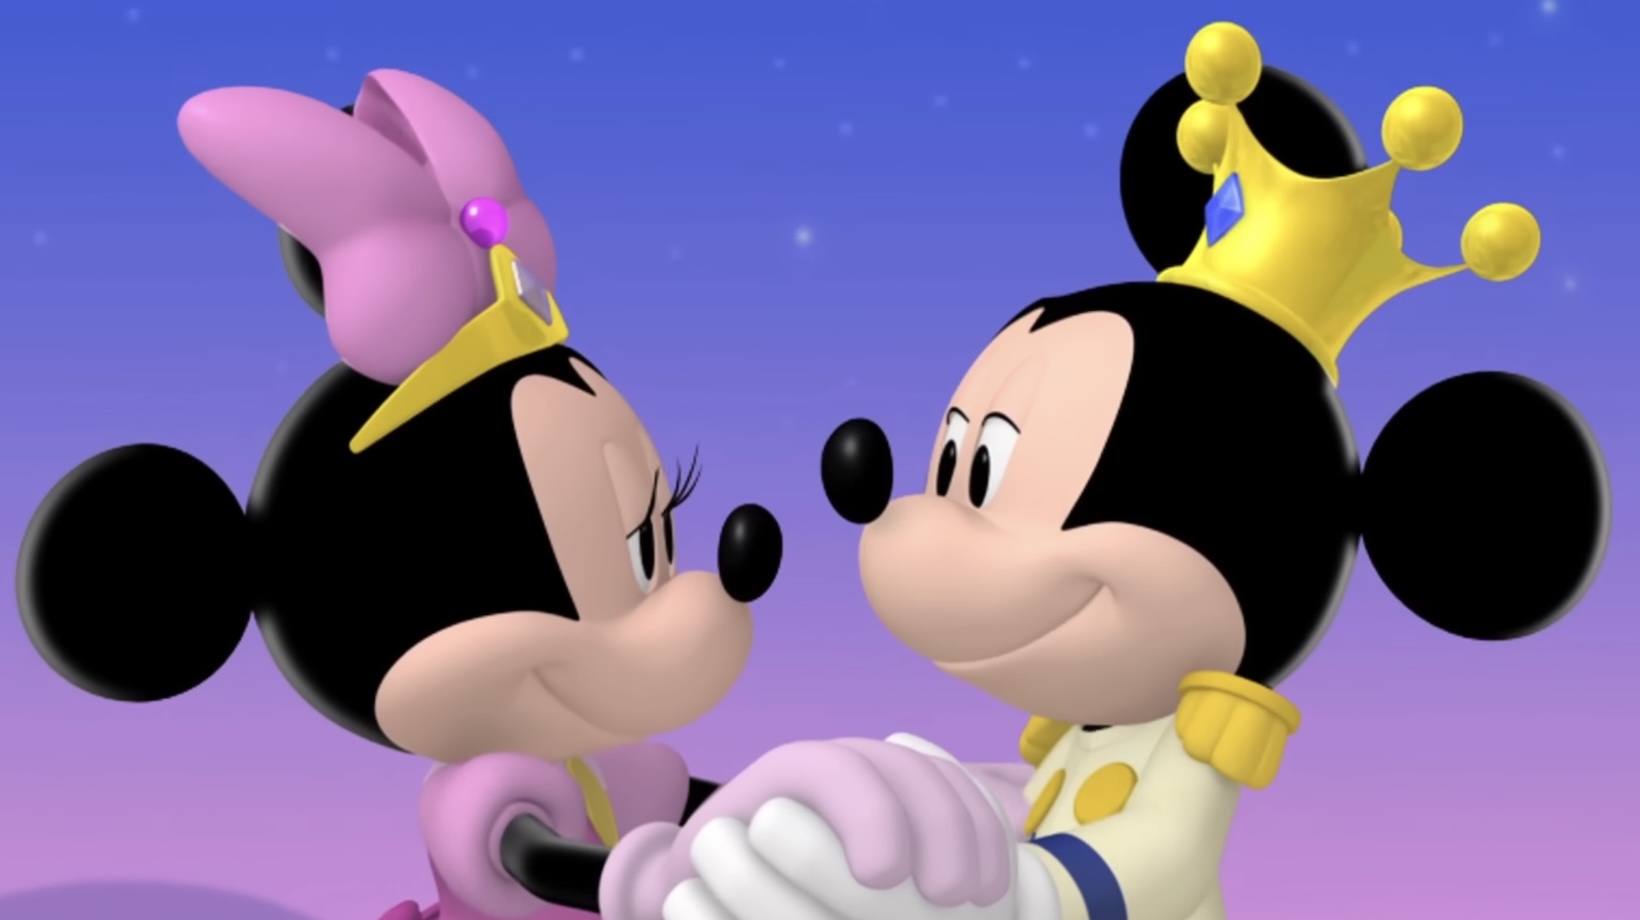 Disney Characters: Is Mickey and Minnie Brother and Sister